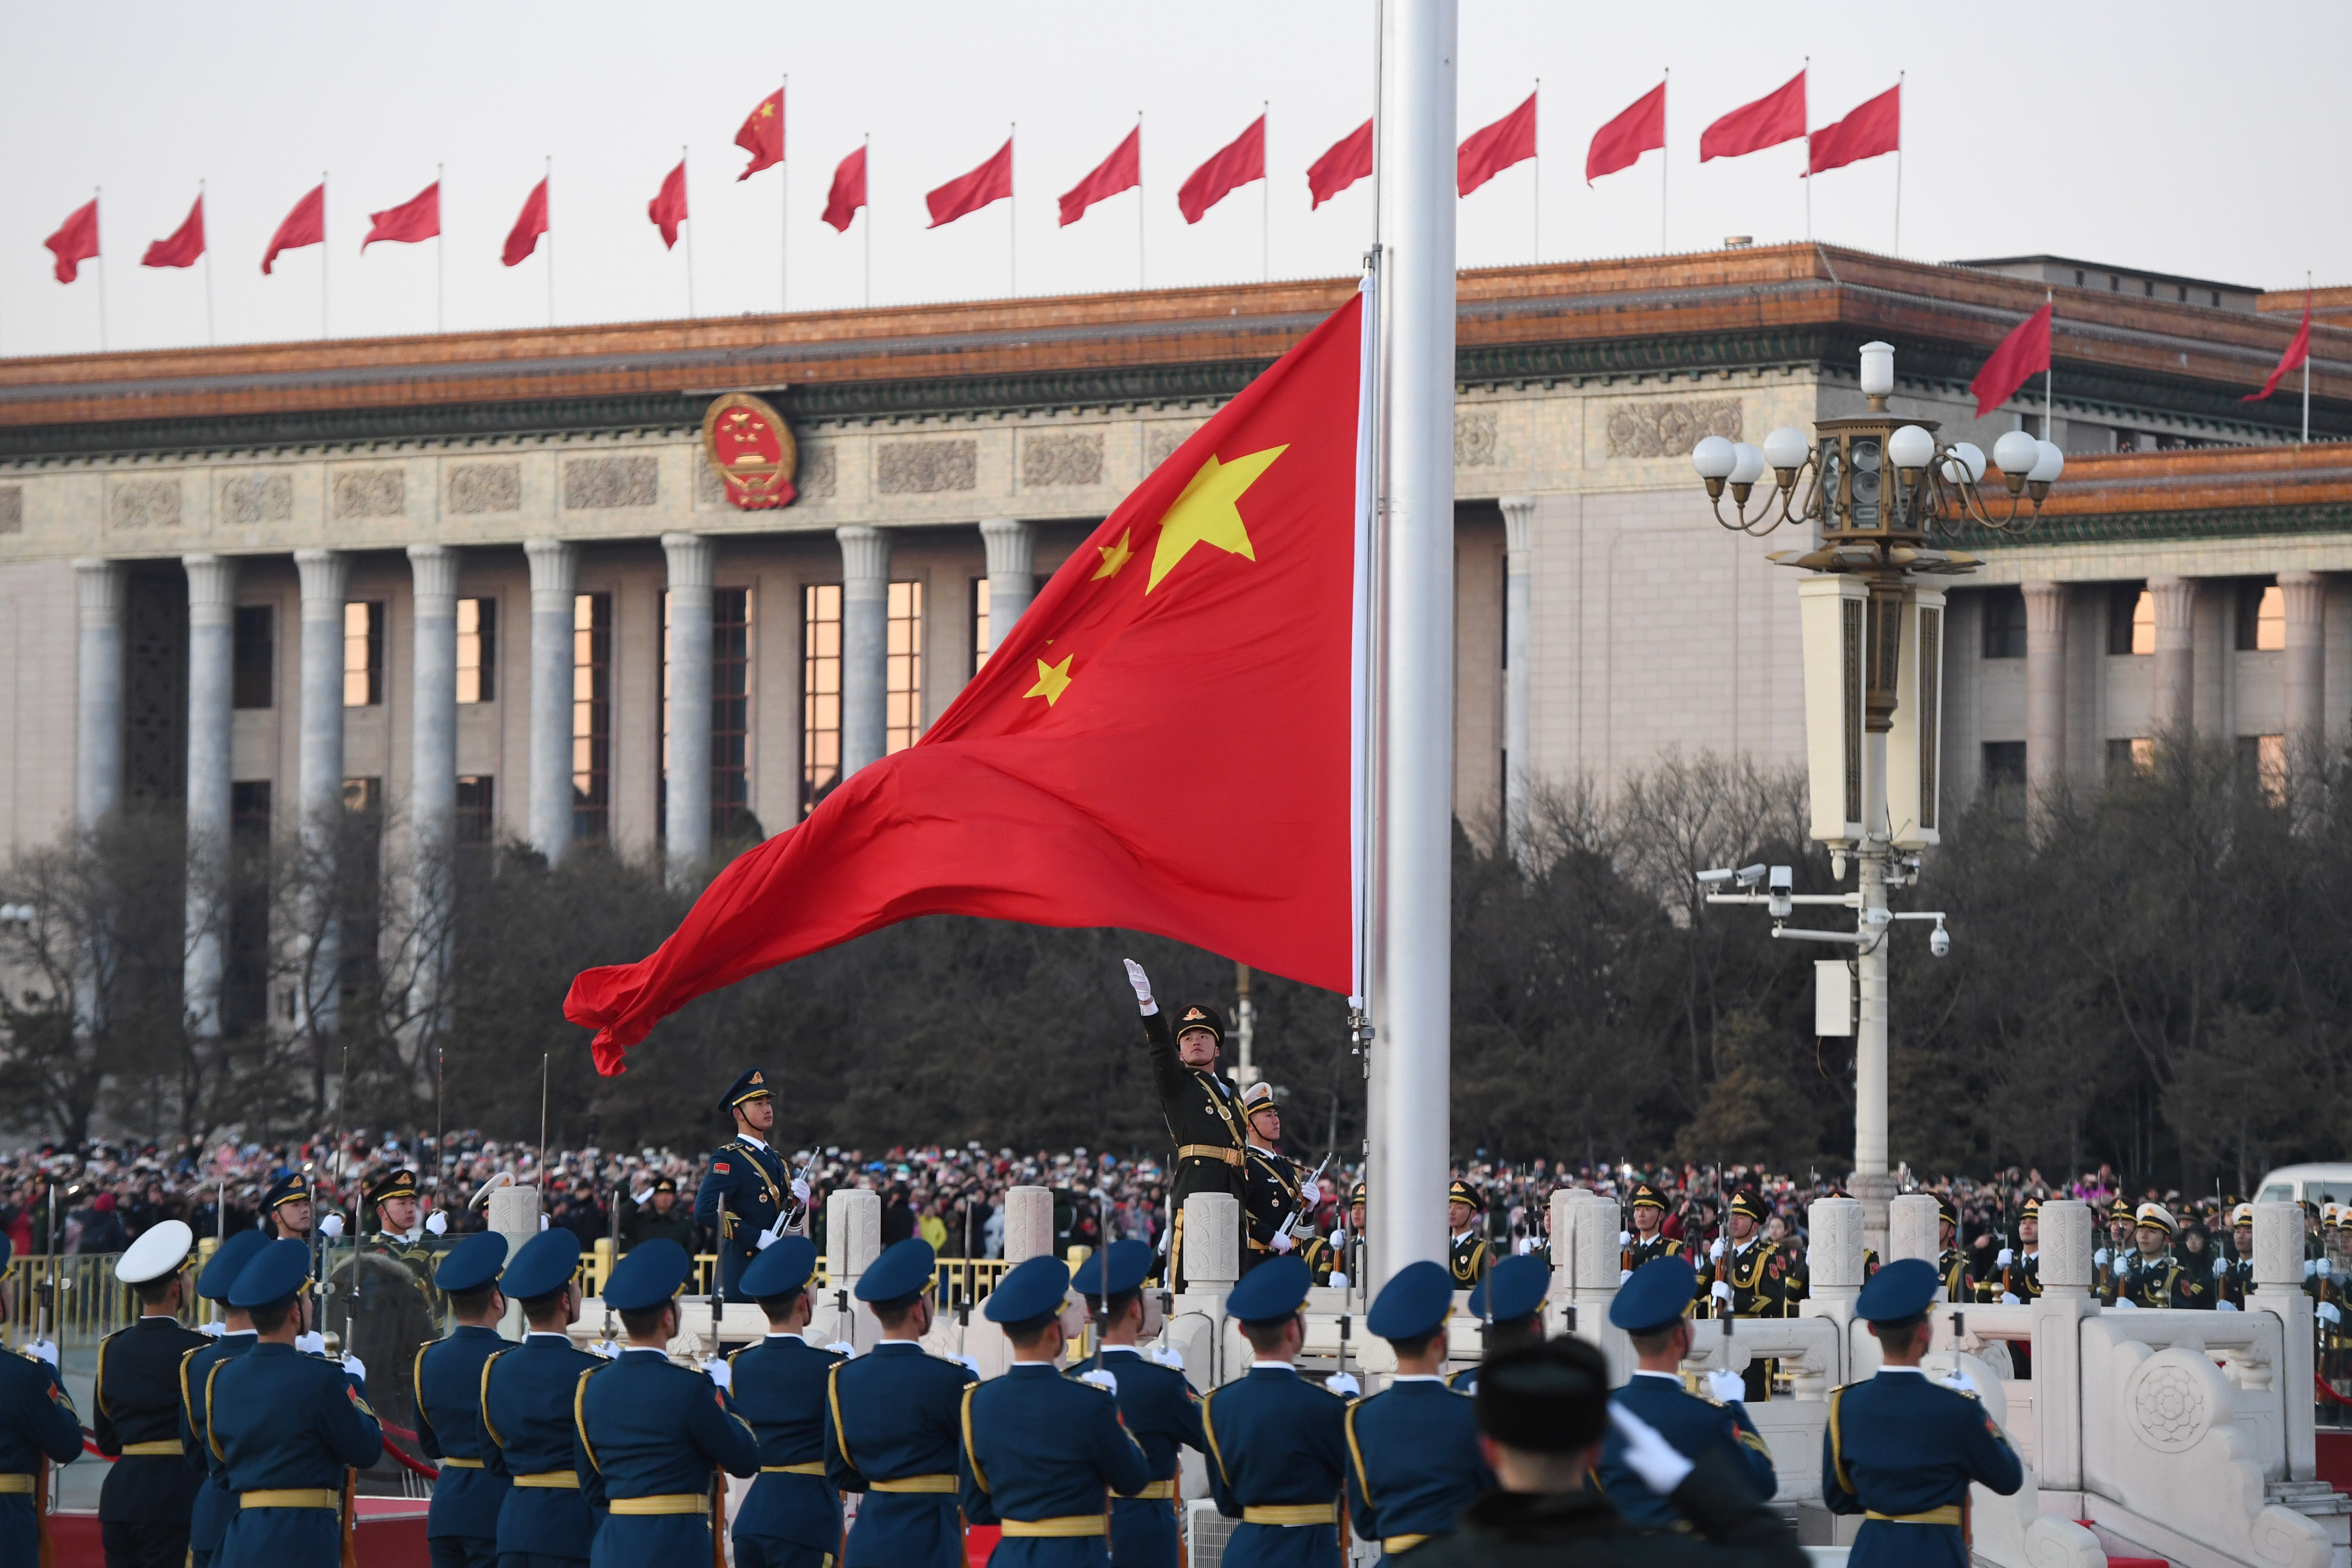 The main goal of the overhaul is to “strengthen the party’s full leadership of all areas and all aspects of work”, according to a Xinhua report. Photo: Xinhua